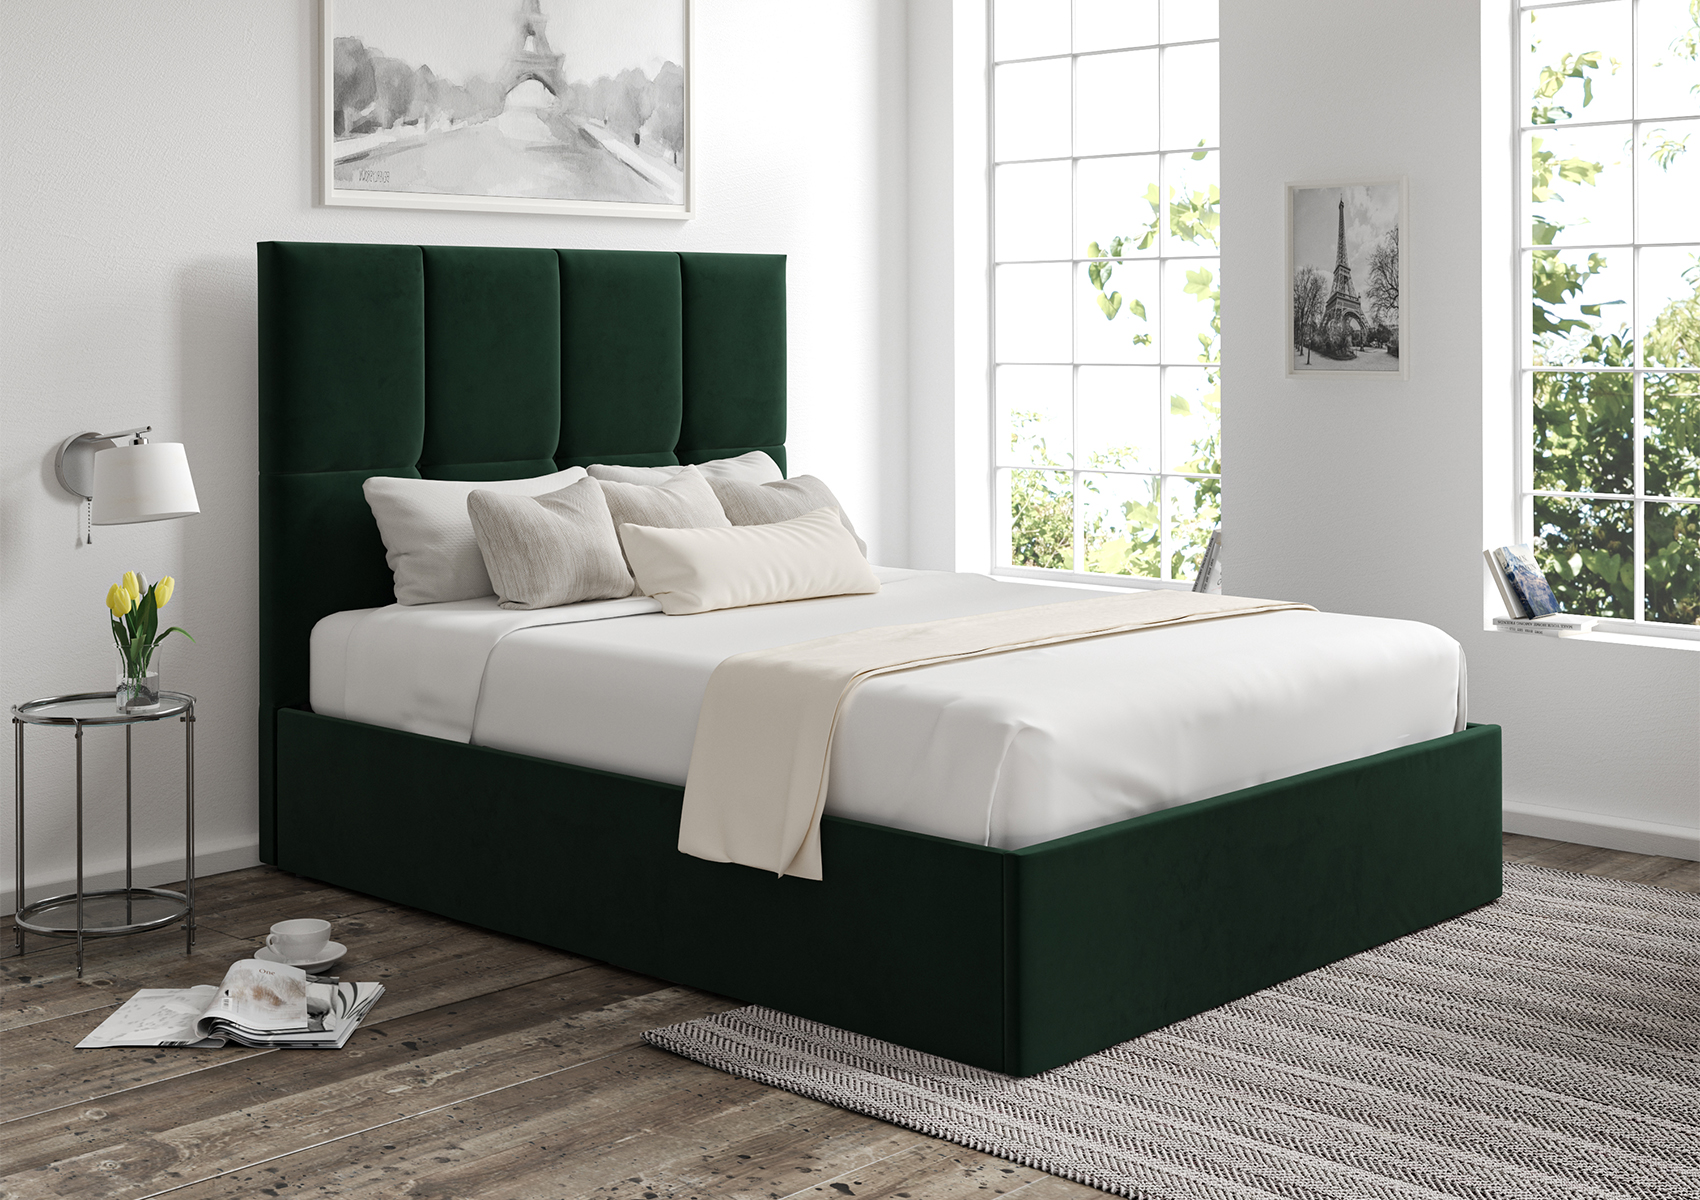 View Turin Hugo Bottle Green Upholstered Ottoman Bed Frame Only Time4Sleep information